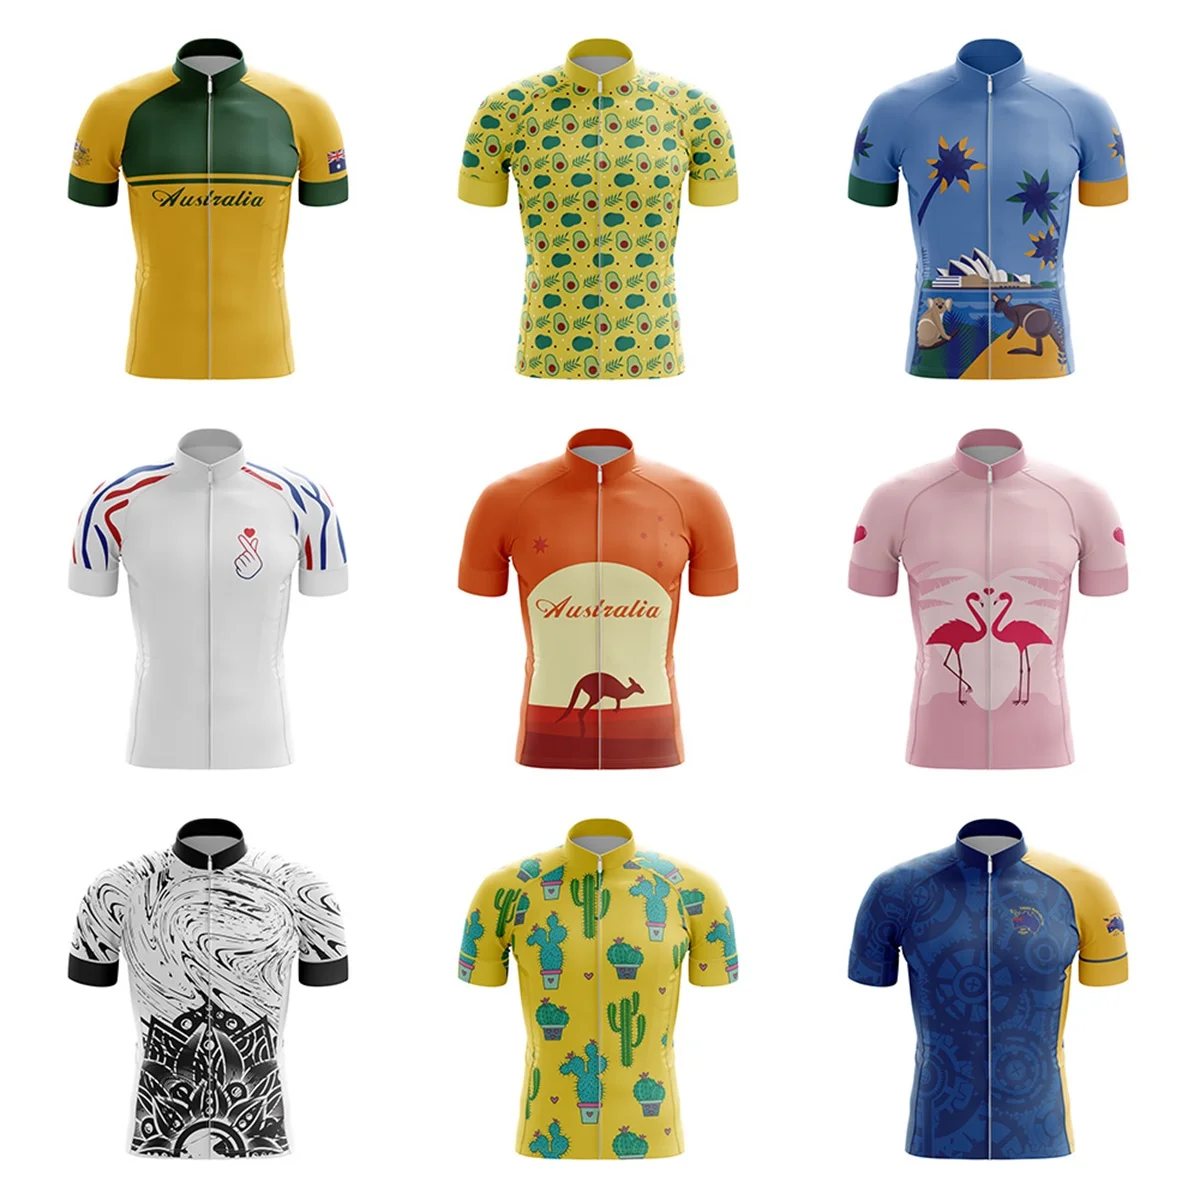 HIRBGOD Men Tourism Cycling Jersey Cute Animal Bike Clothing High Quality Bicycle Sports Shirt Quick Dry Wear-Resistant,TYZ650